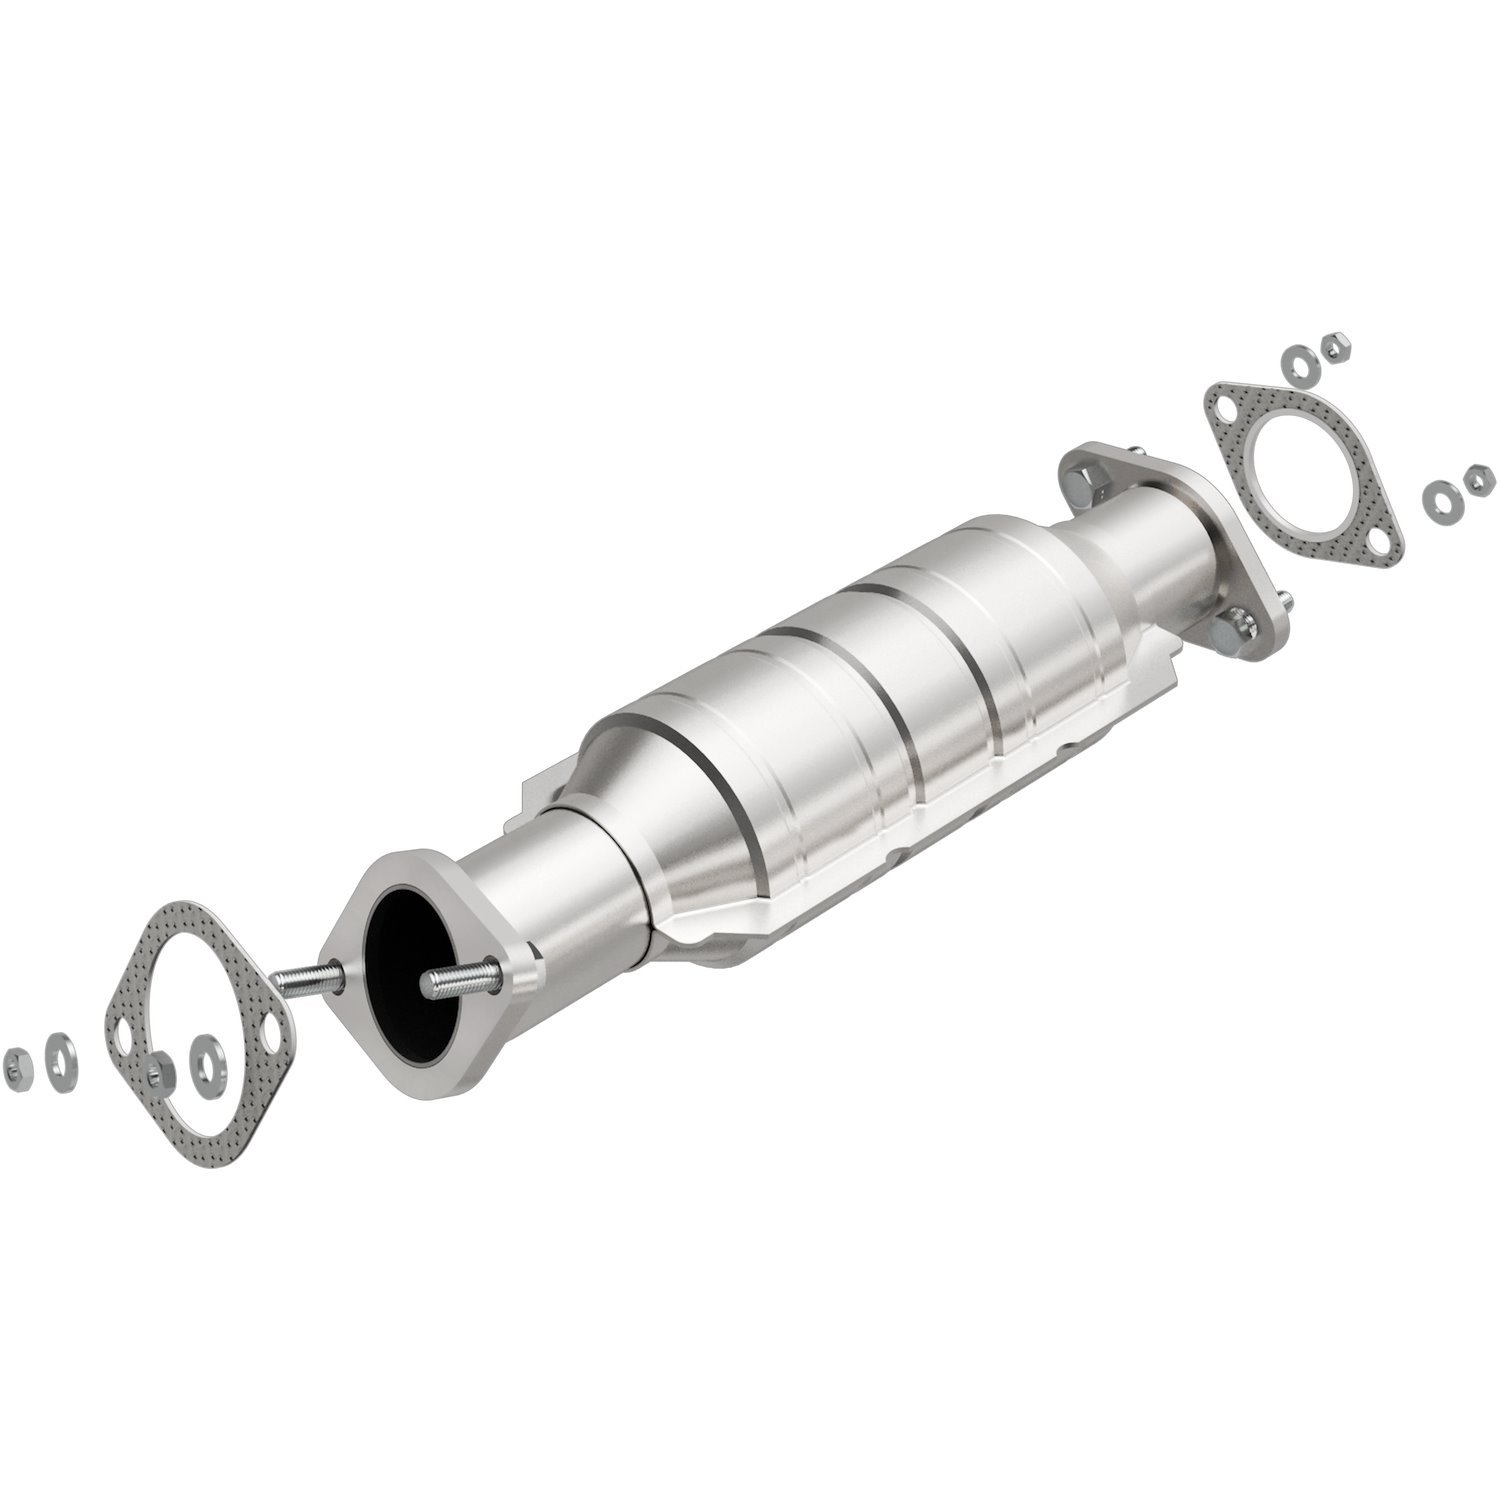 OEM Grade Federal / EPA Compliant Direct-Fit Catalytic Converter 51714